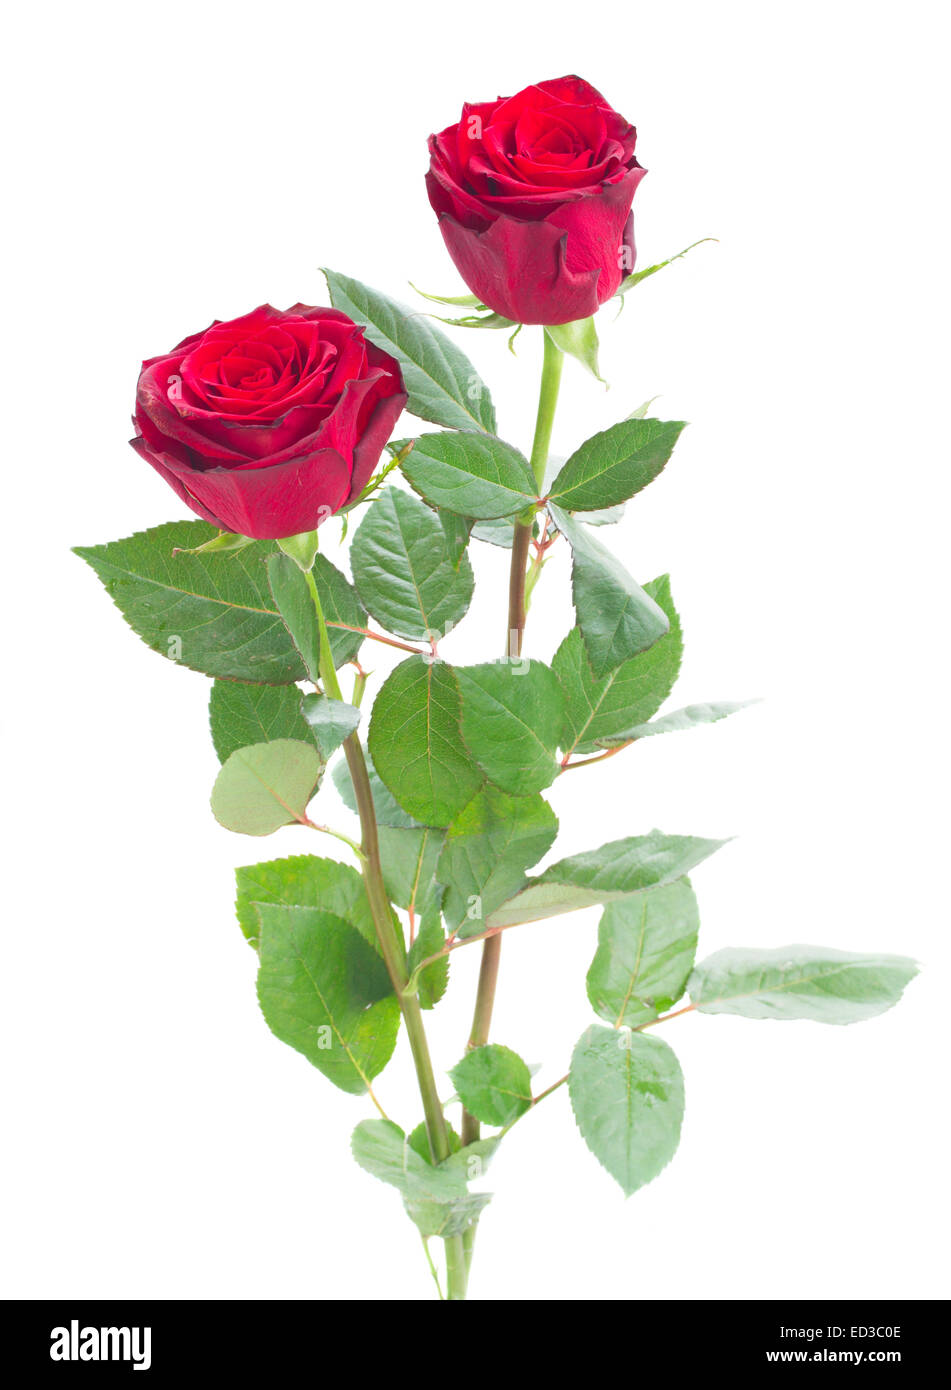 two scarlet red roses Stock Photo - Alamy